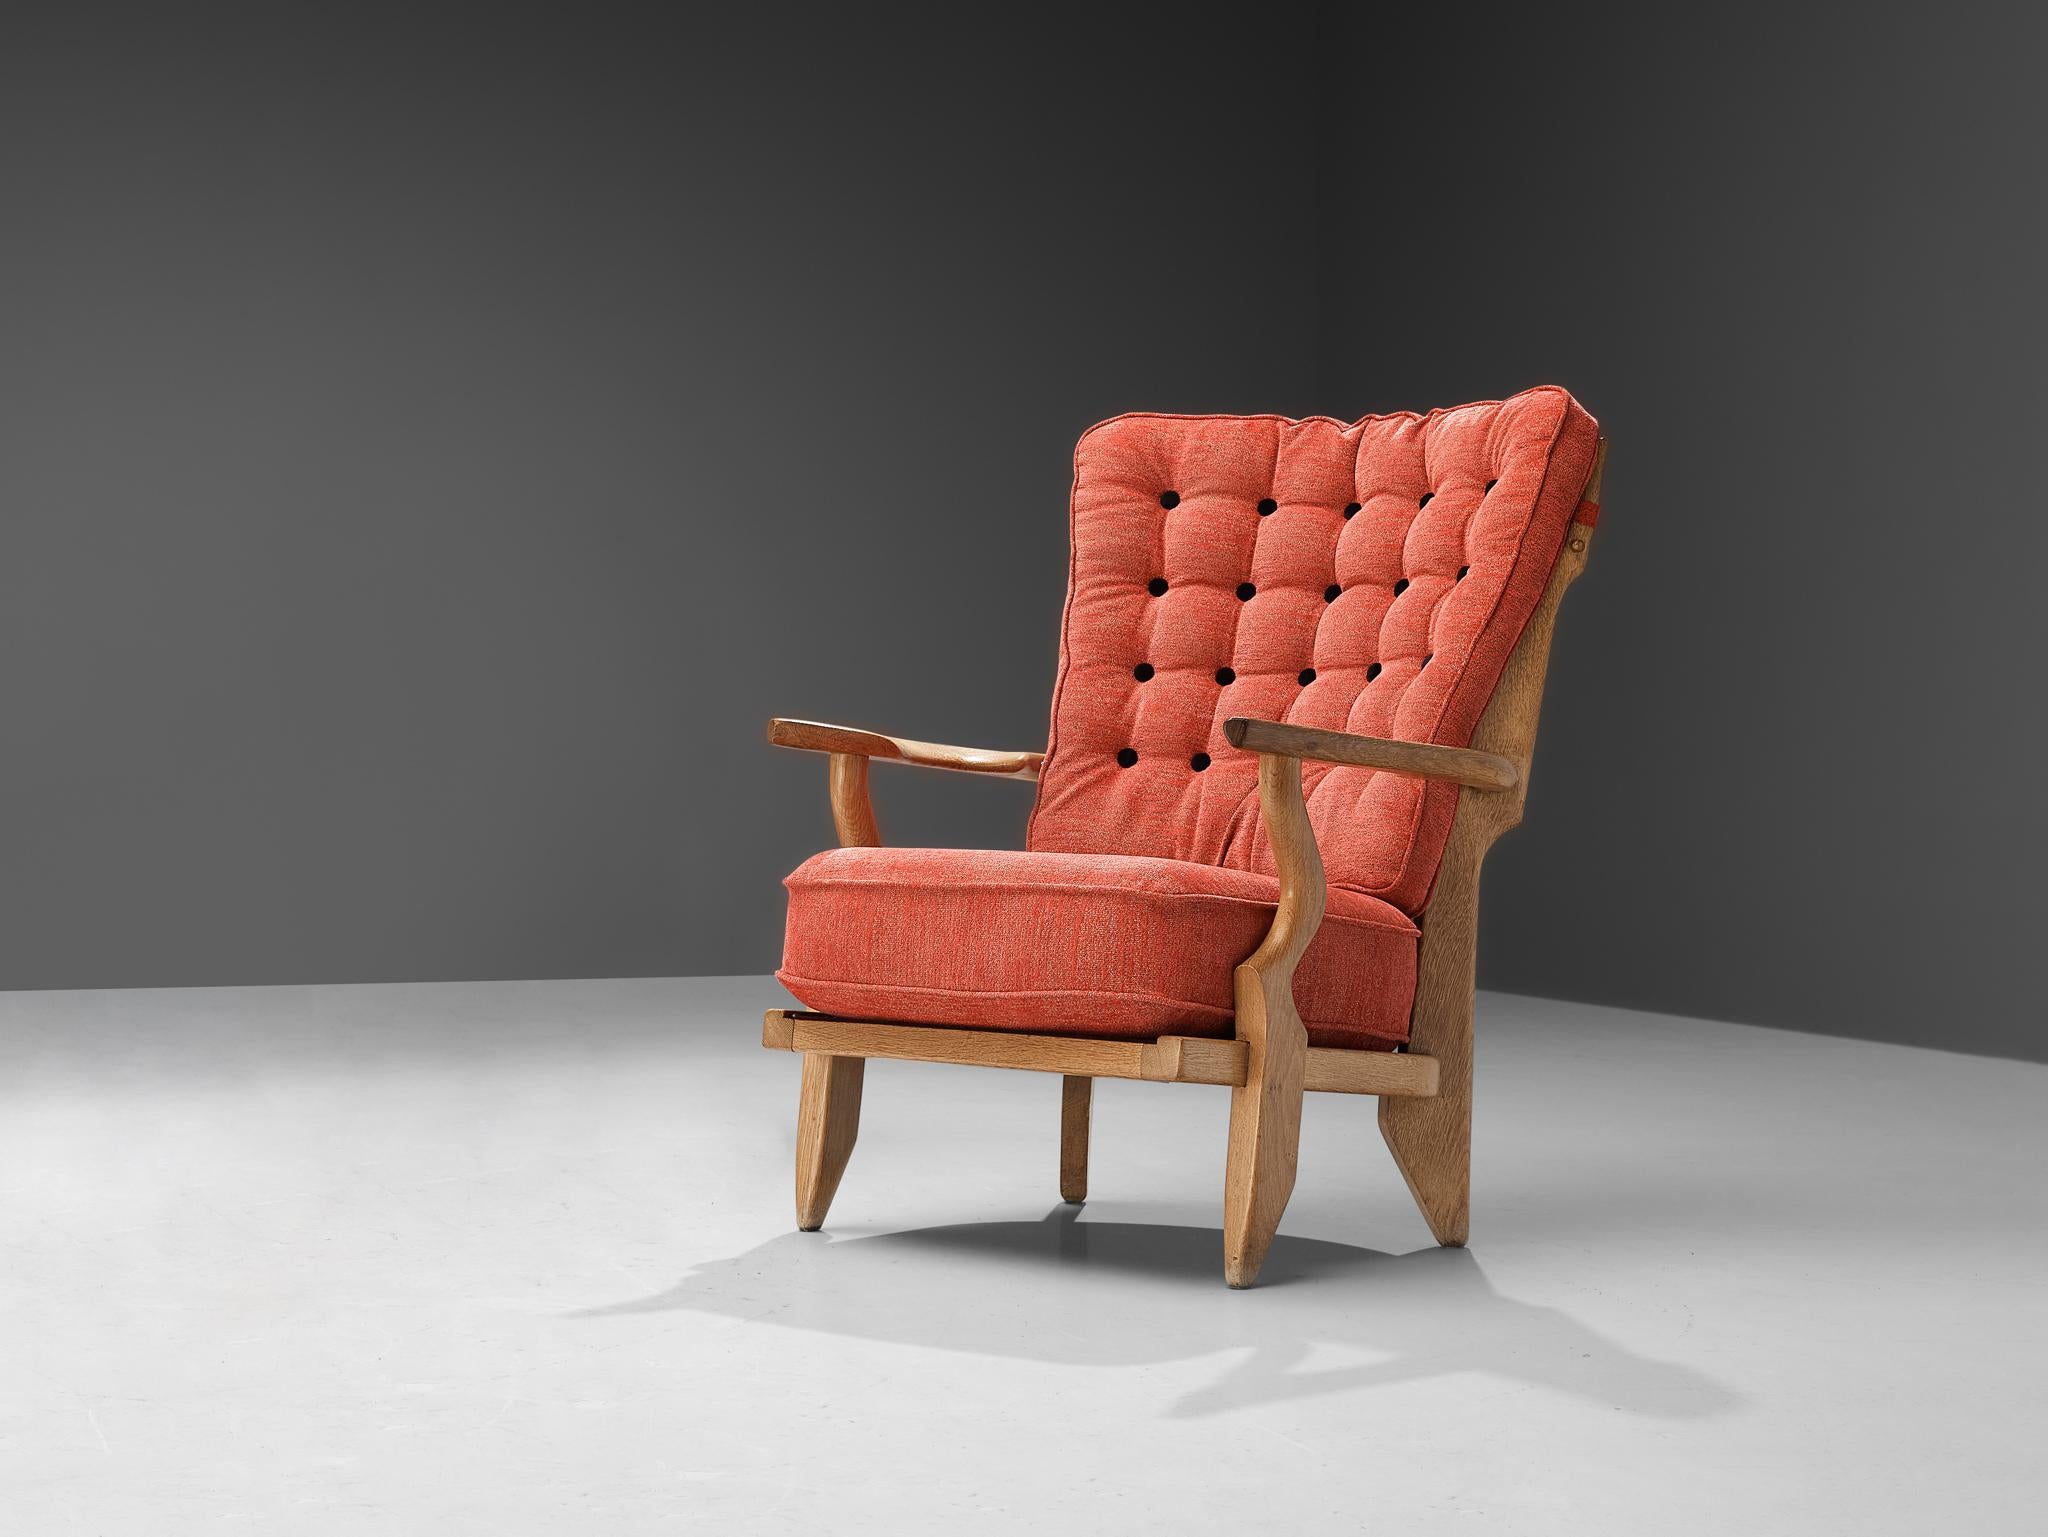 Guillerme & Chambron 'Mid Repos' Lounge Chair in Oak and Red Upholstery